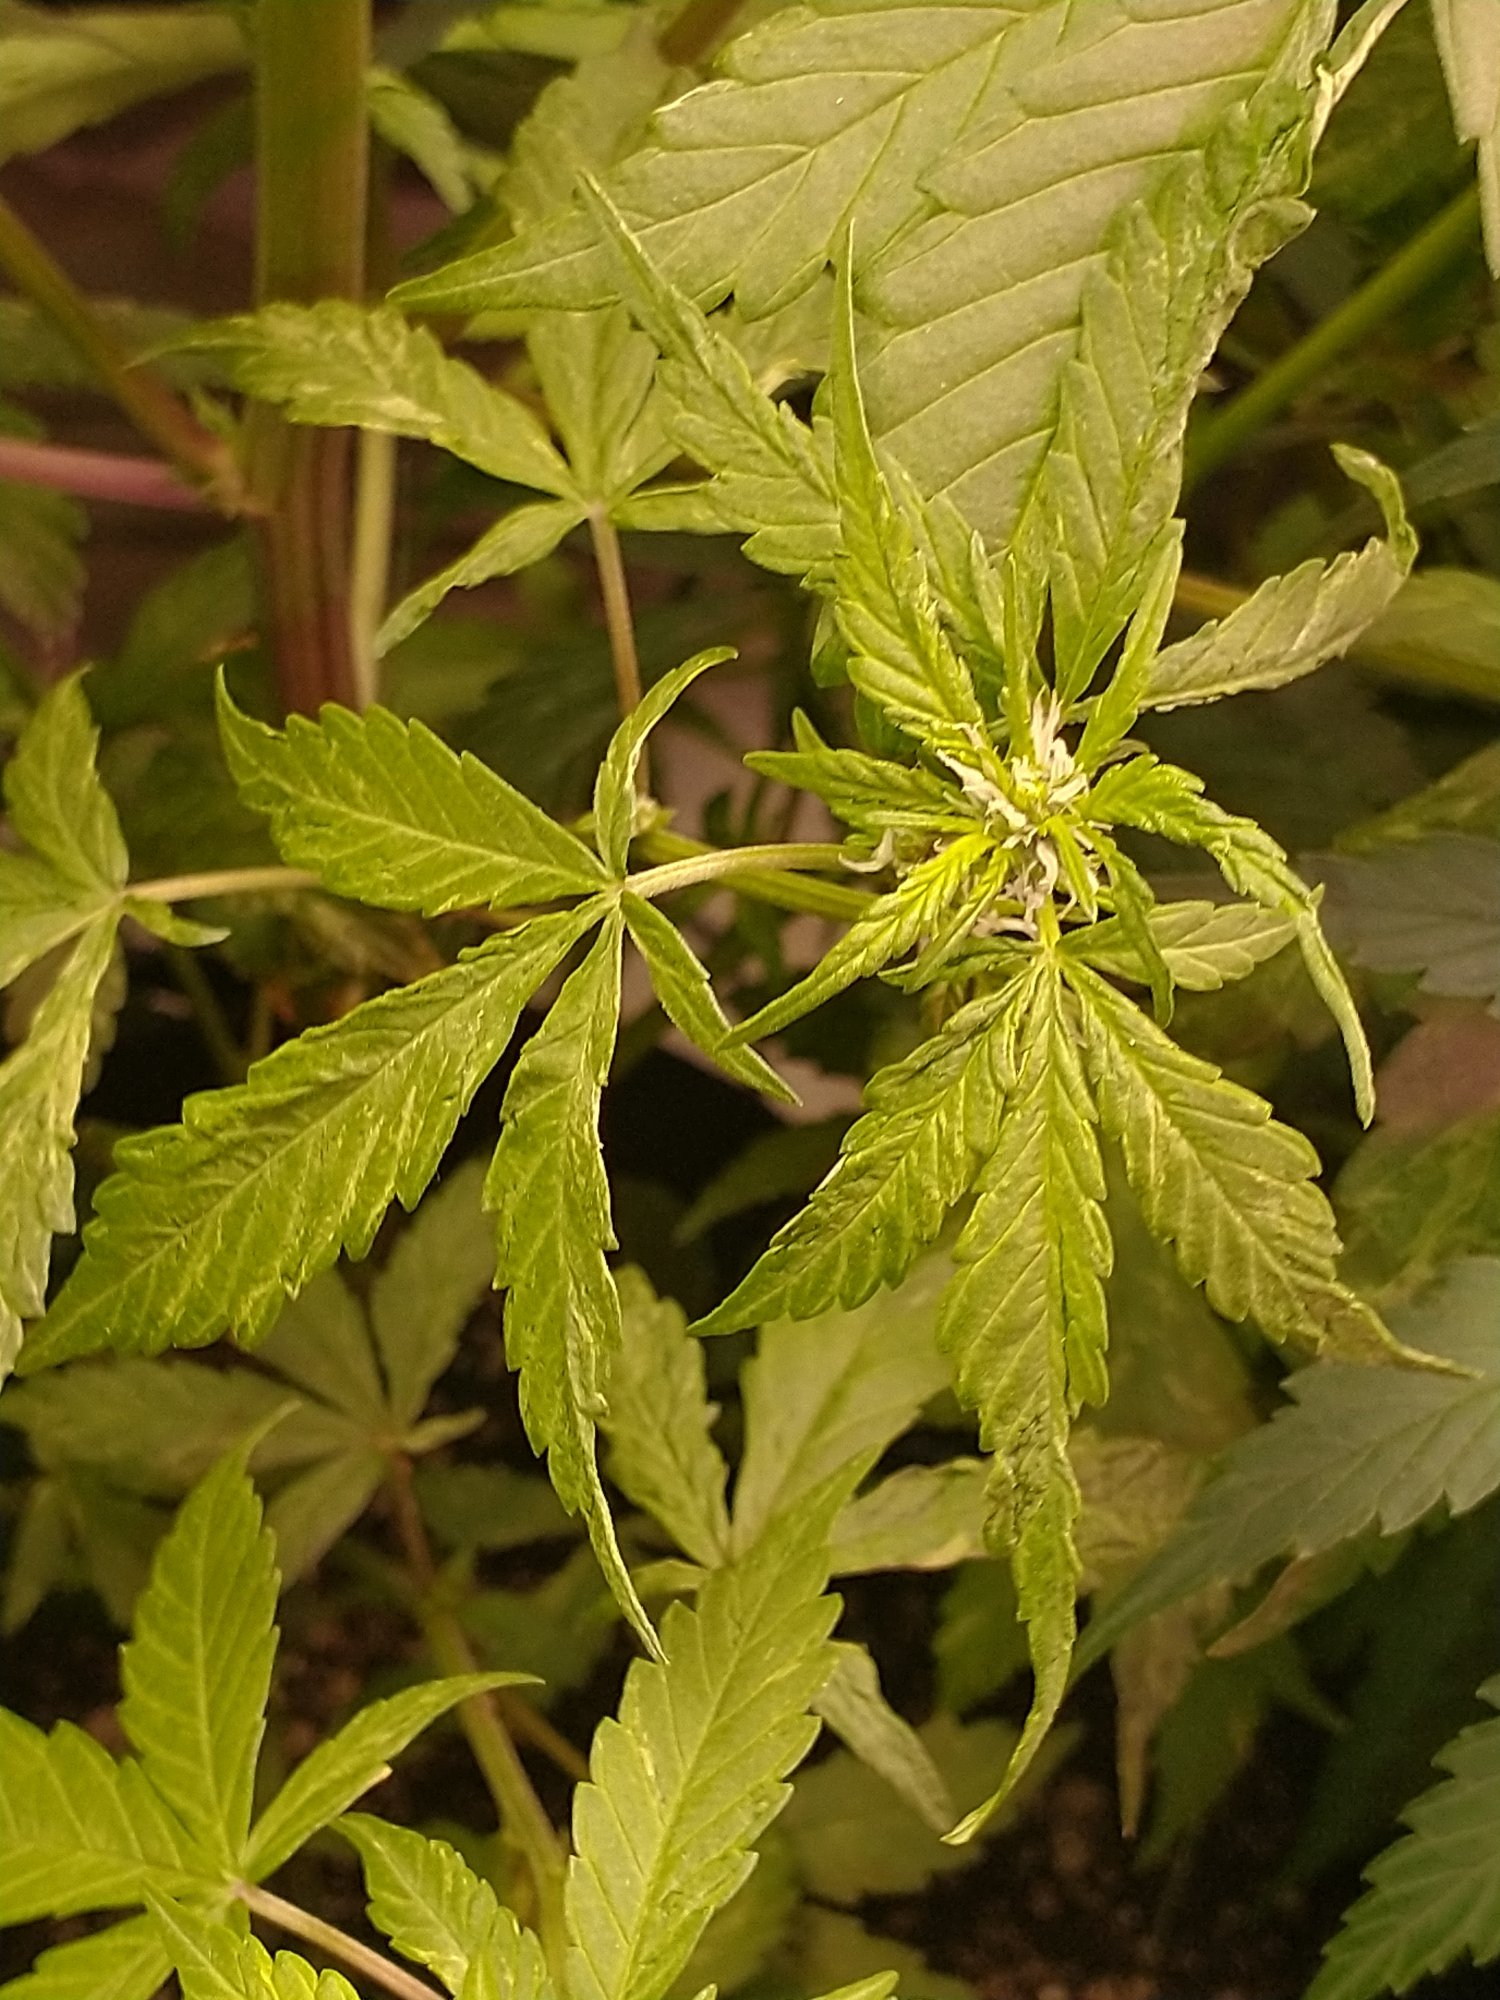 Whats wrong with these leaves 5